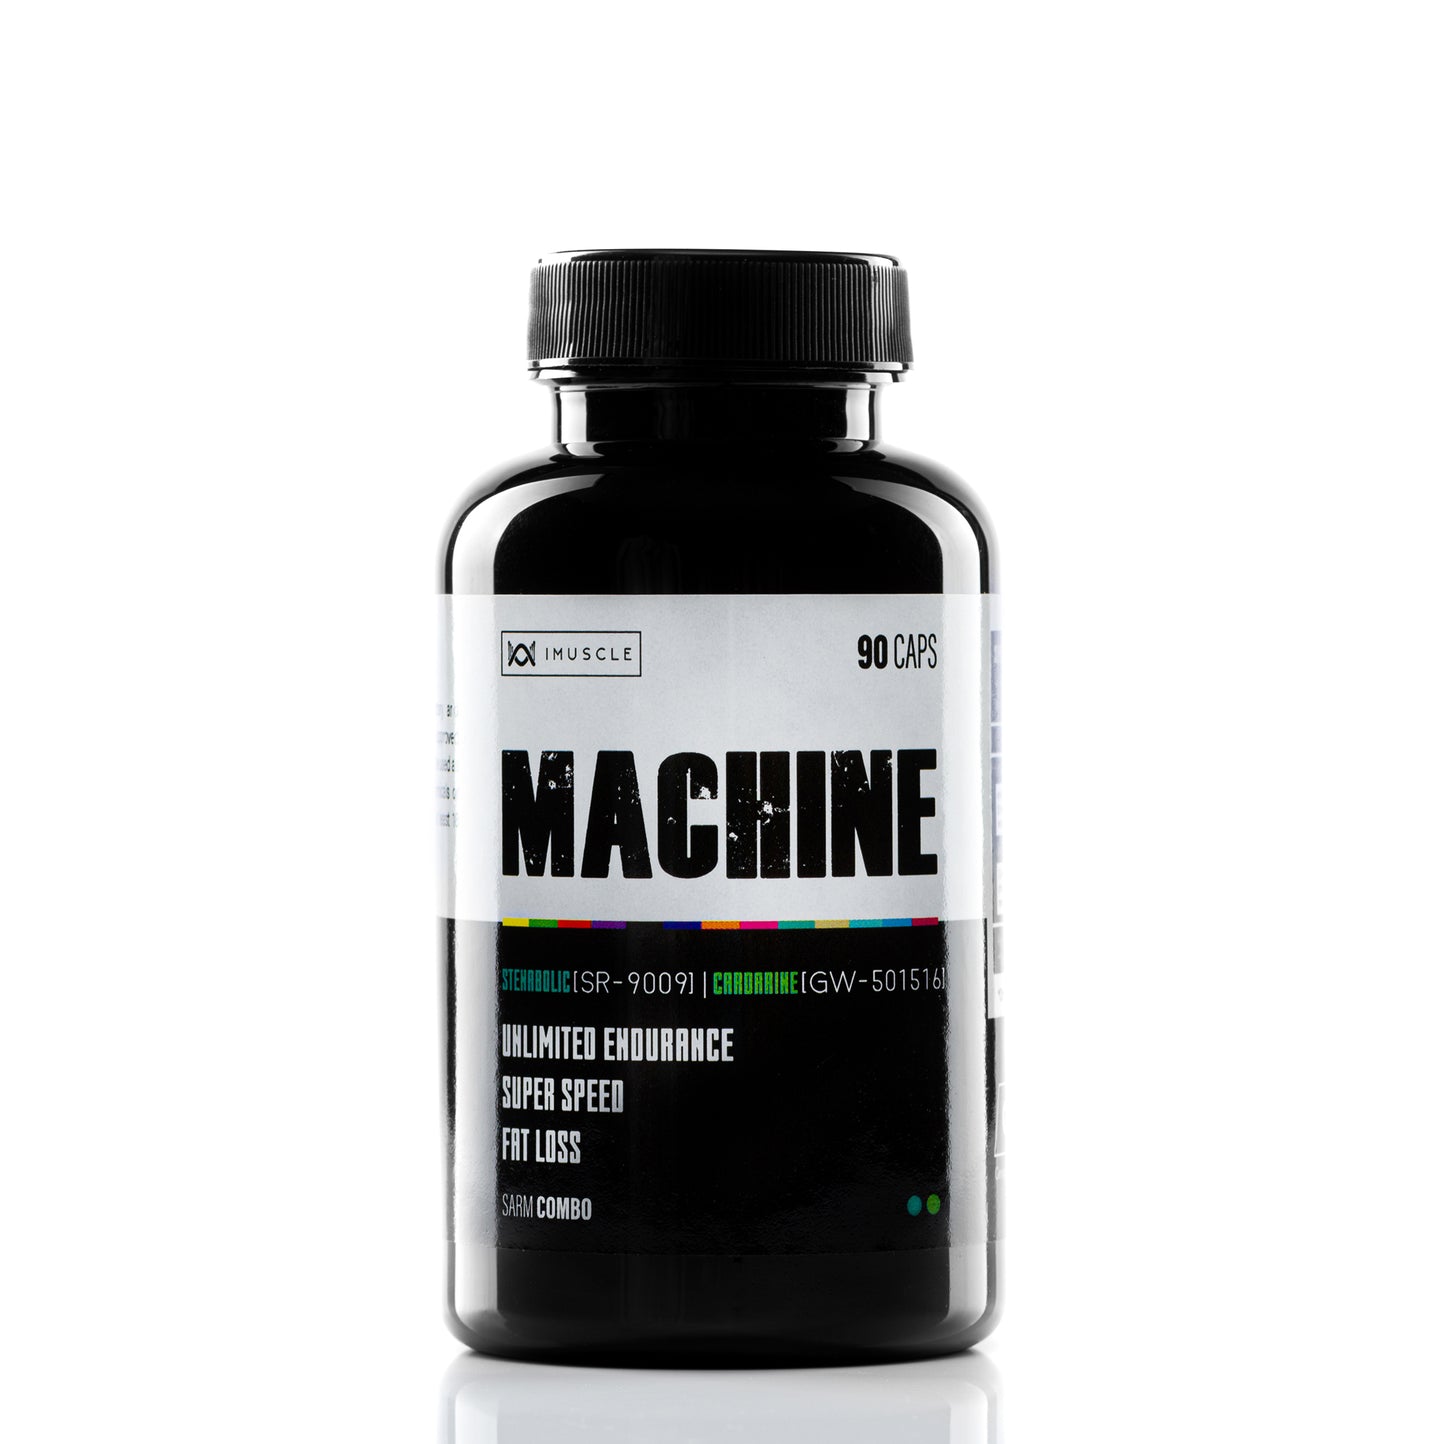 iMuscle MACHINE 90 CAPS - imusclefr 